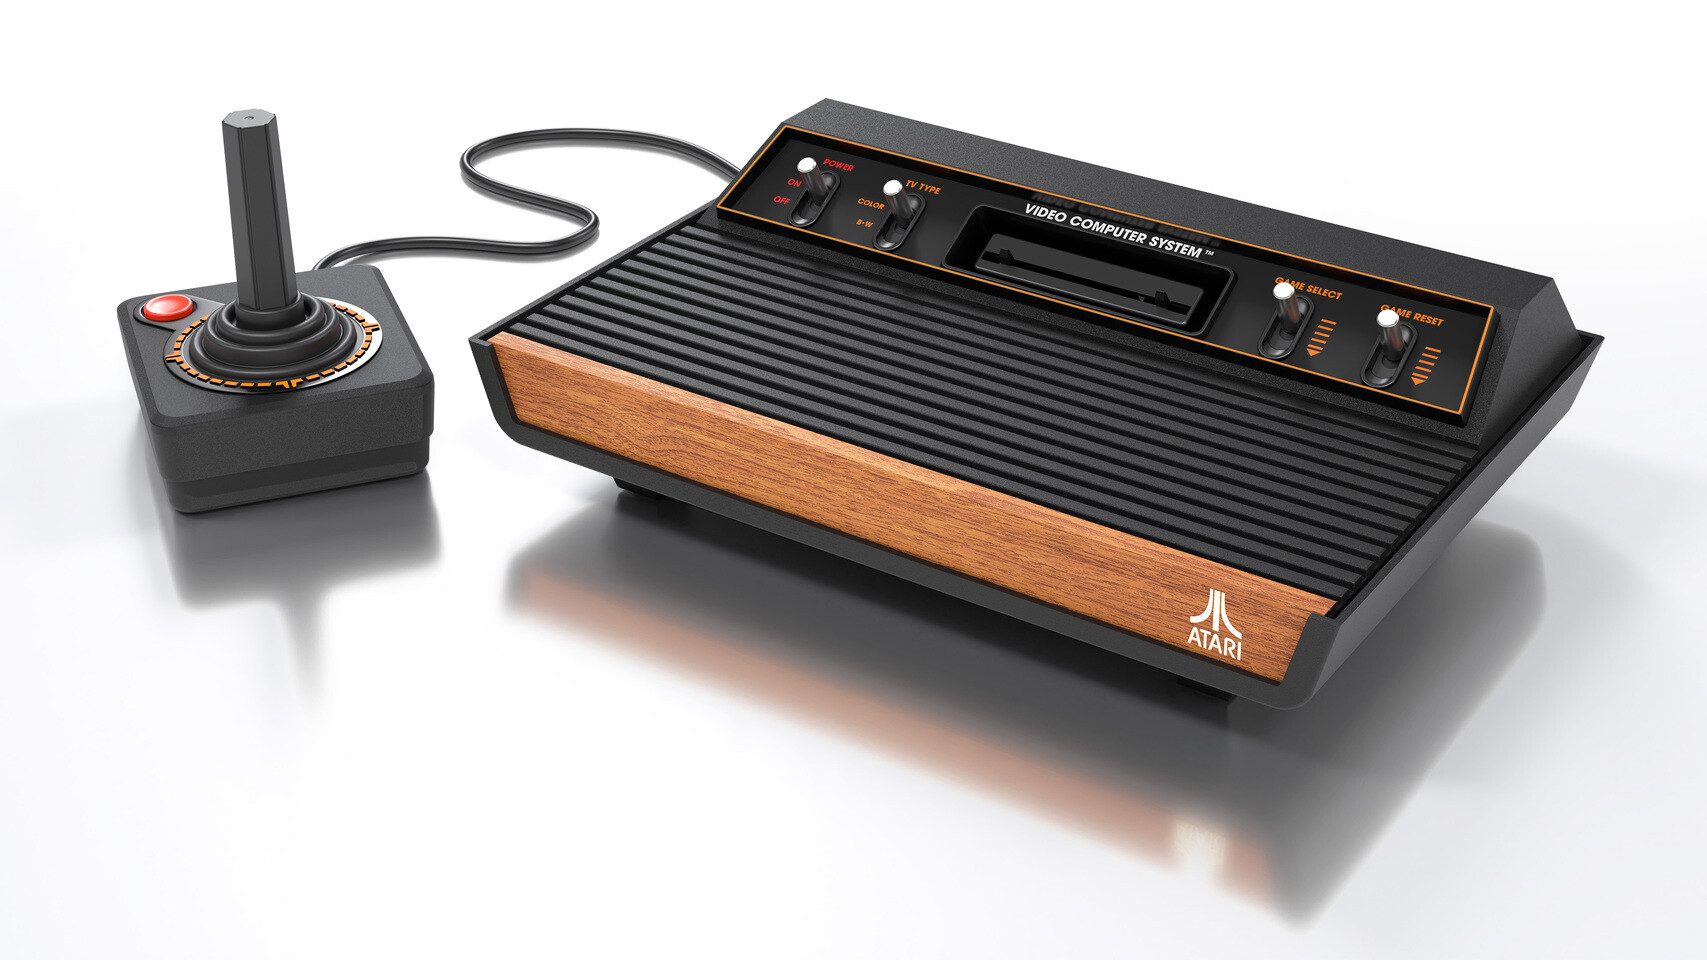 The Atari 400 Is Getting an Awesome Mini Edition